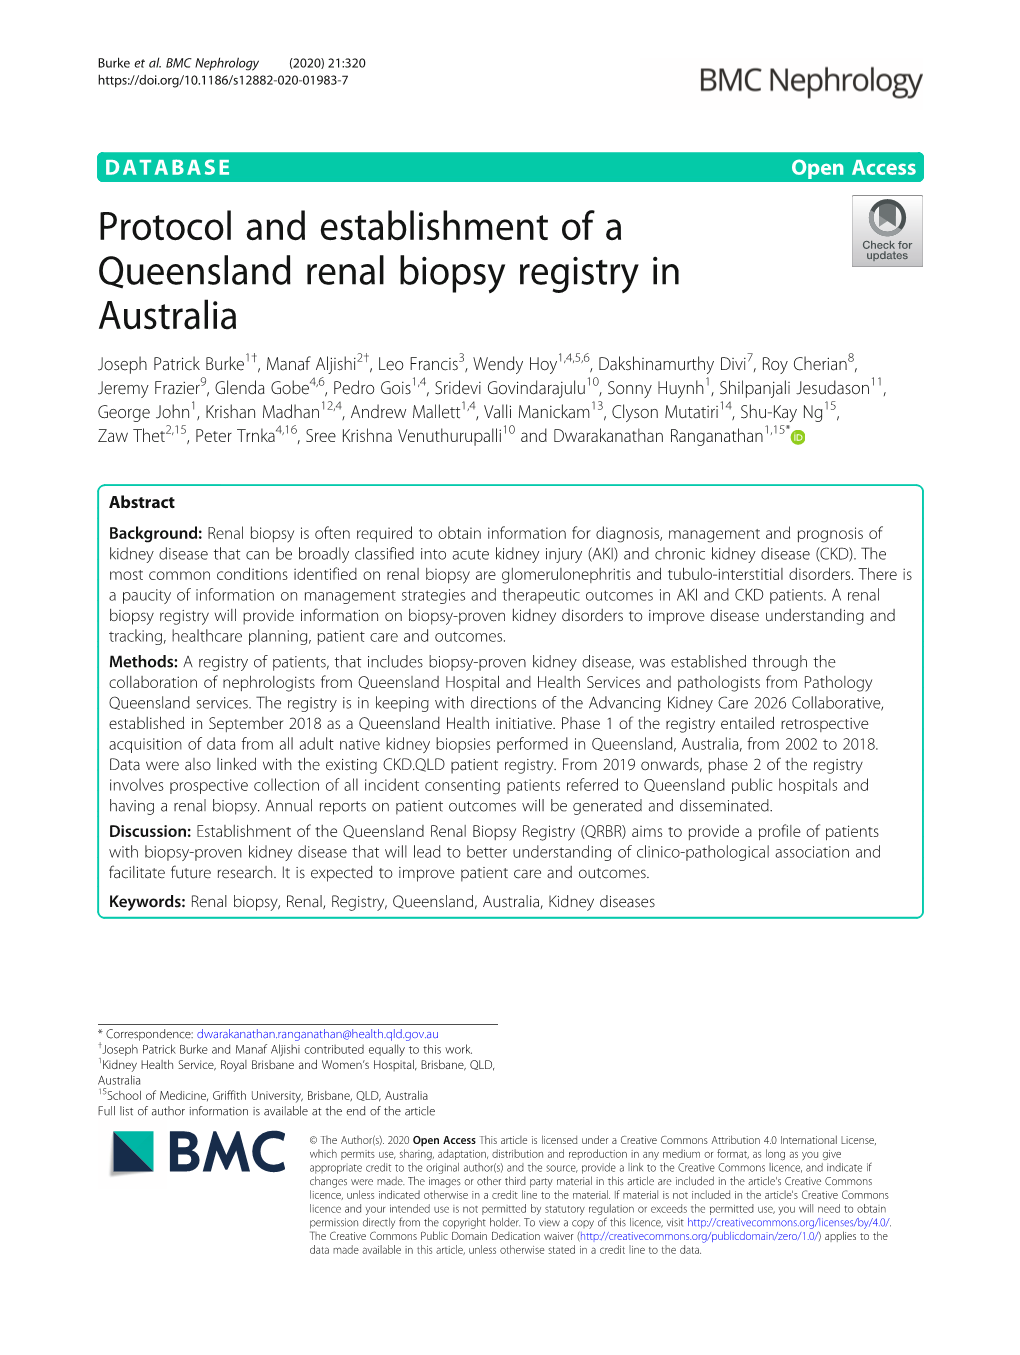 Protocol and Establishment of a Queensland Renal Biopsy Registry In